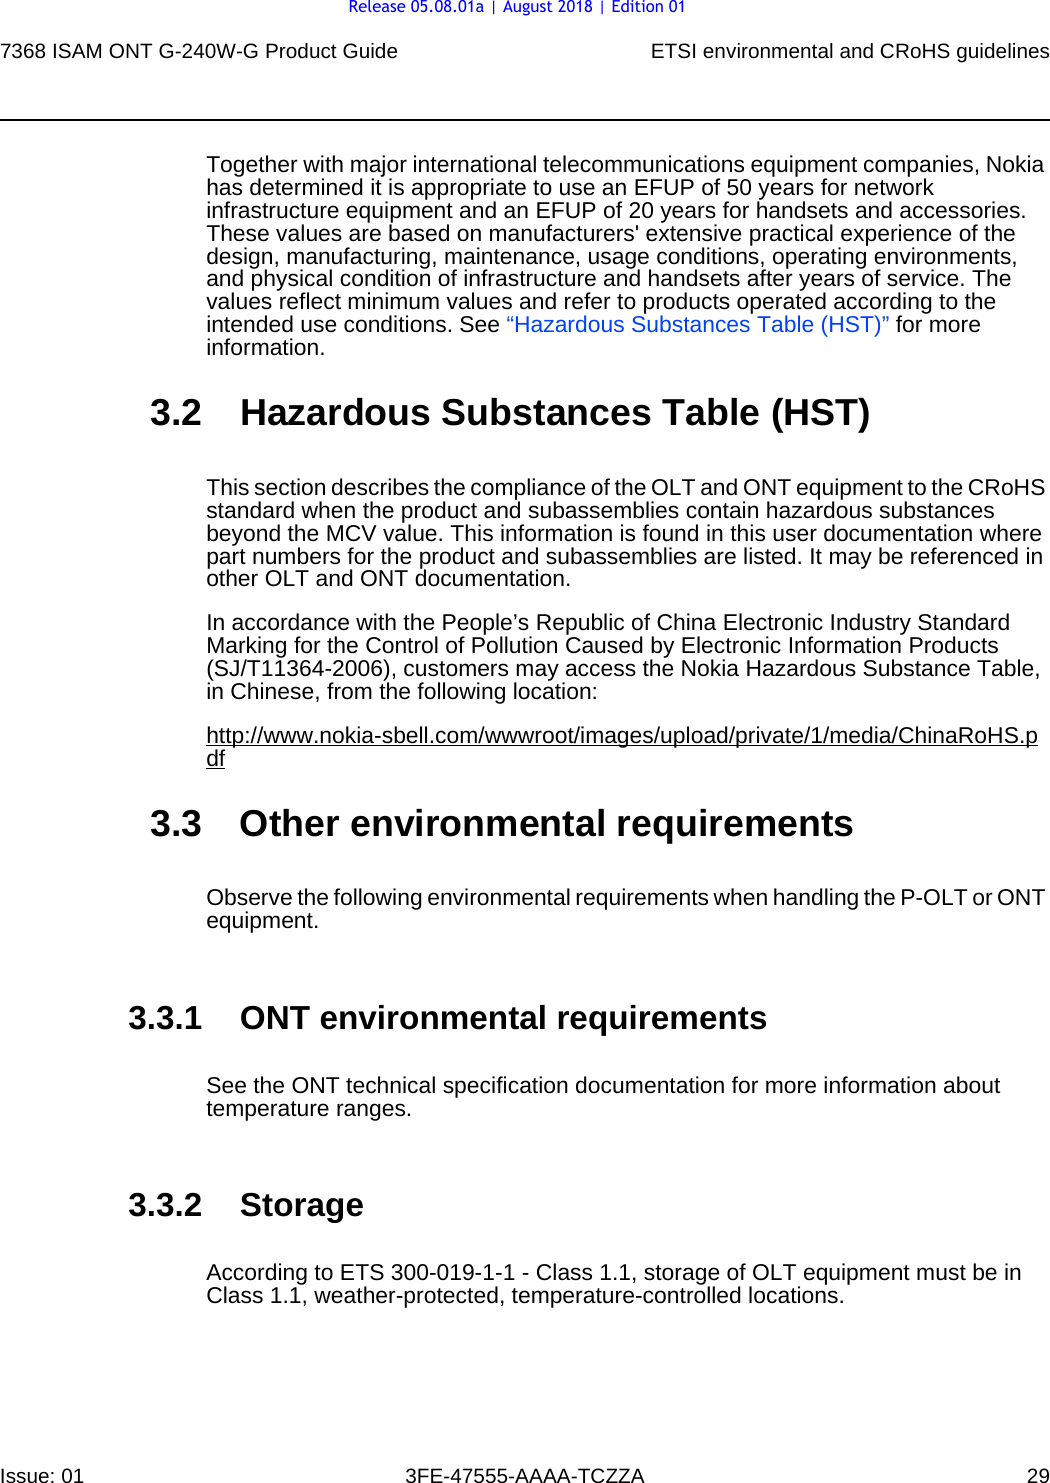 7368 ISAM ONT G-240W-G Product Guide ETSI environmental and CRoHS guidelinesIssue: 01 3FE-47555-AAAA-TCZZA 29 Together with major international telecommunications equipment companies, Nokia has determined it is appropriate to use an EFUP of 50 years for network infrastructure equipment and an EFUP of 20 years for handsets and accessories. These values are based on manufacturers&apos; extensive practical experience of the design, manufacturing, maintenance, usage conditions, operating environments, and physical condition of infrastructure and handsets after years of service. The values reflect minimum values and refer to products operated according to the intended use conditions. See “Hazardous Substances Table (HST)” for more information.3.2 Hazardous Substances Table (HST)This section describes the compliance of the OLT and ONT equipment to the CRoHS standard when the product and subassemblies contain hazardous substances beyond the MCV value. This information is found in this user documentation where part numbers for the product and subassemblies are listed. It may be referenced in other OLT and ONT documentation.In accordance with the People’s Republic of China Electronic Industry Standard Marking for the Control of Pollution Caused by Electronic Information Products (SJ/T11364-2006), customers may access the Nokia Hazardous Substance Table, in Chinese, from the following location:http://www.nokia-sbell.com/wwwroot/images/upload/private/1/media/ChinaRoHS.pdf3.3 Other environmental requirementsObserve the following environmental requirements when handling the P-OLT or ONT equipment.3.3.1 ONT environmental requirementsSee the ONT technical specification documentation for more information about temperature ranges.3.3.2 StorageAccording to ETS 300-019-1-1 - Class 1.1, storage of OLT equipment must be in Class 1.1, weather-protected, temperature-controlled locations.Release 05.08.01a | August 2018 | Edition 01